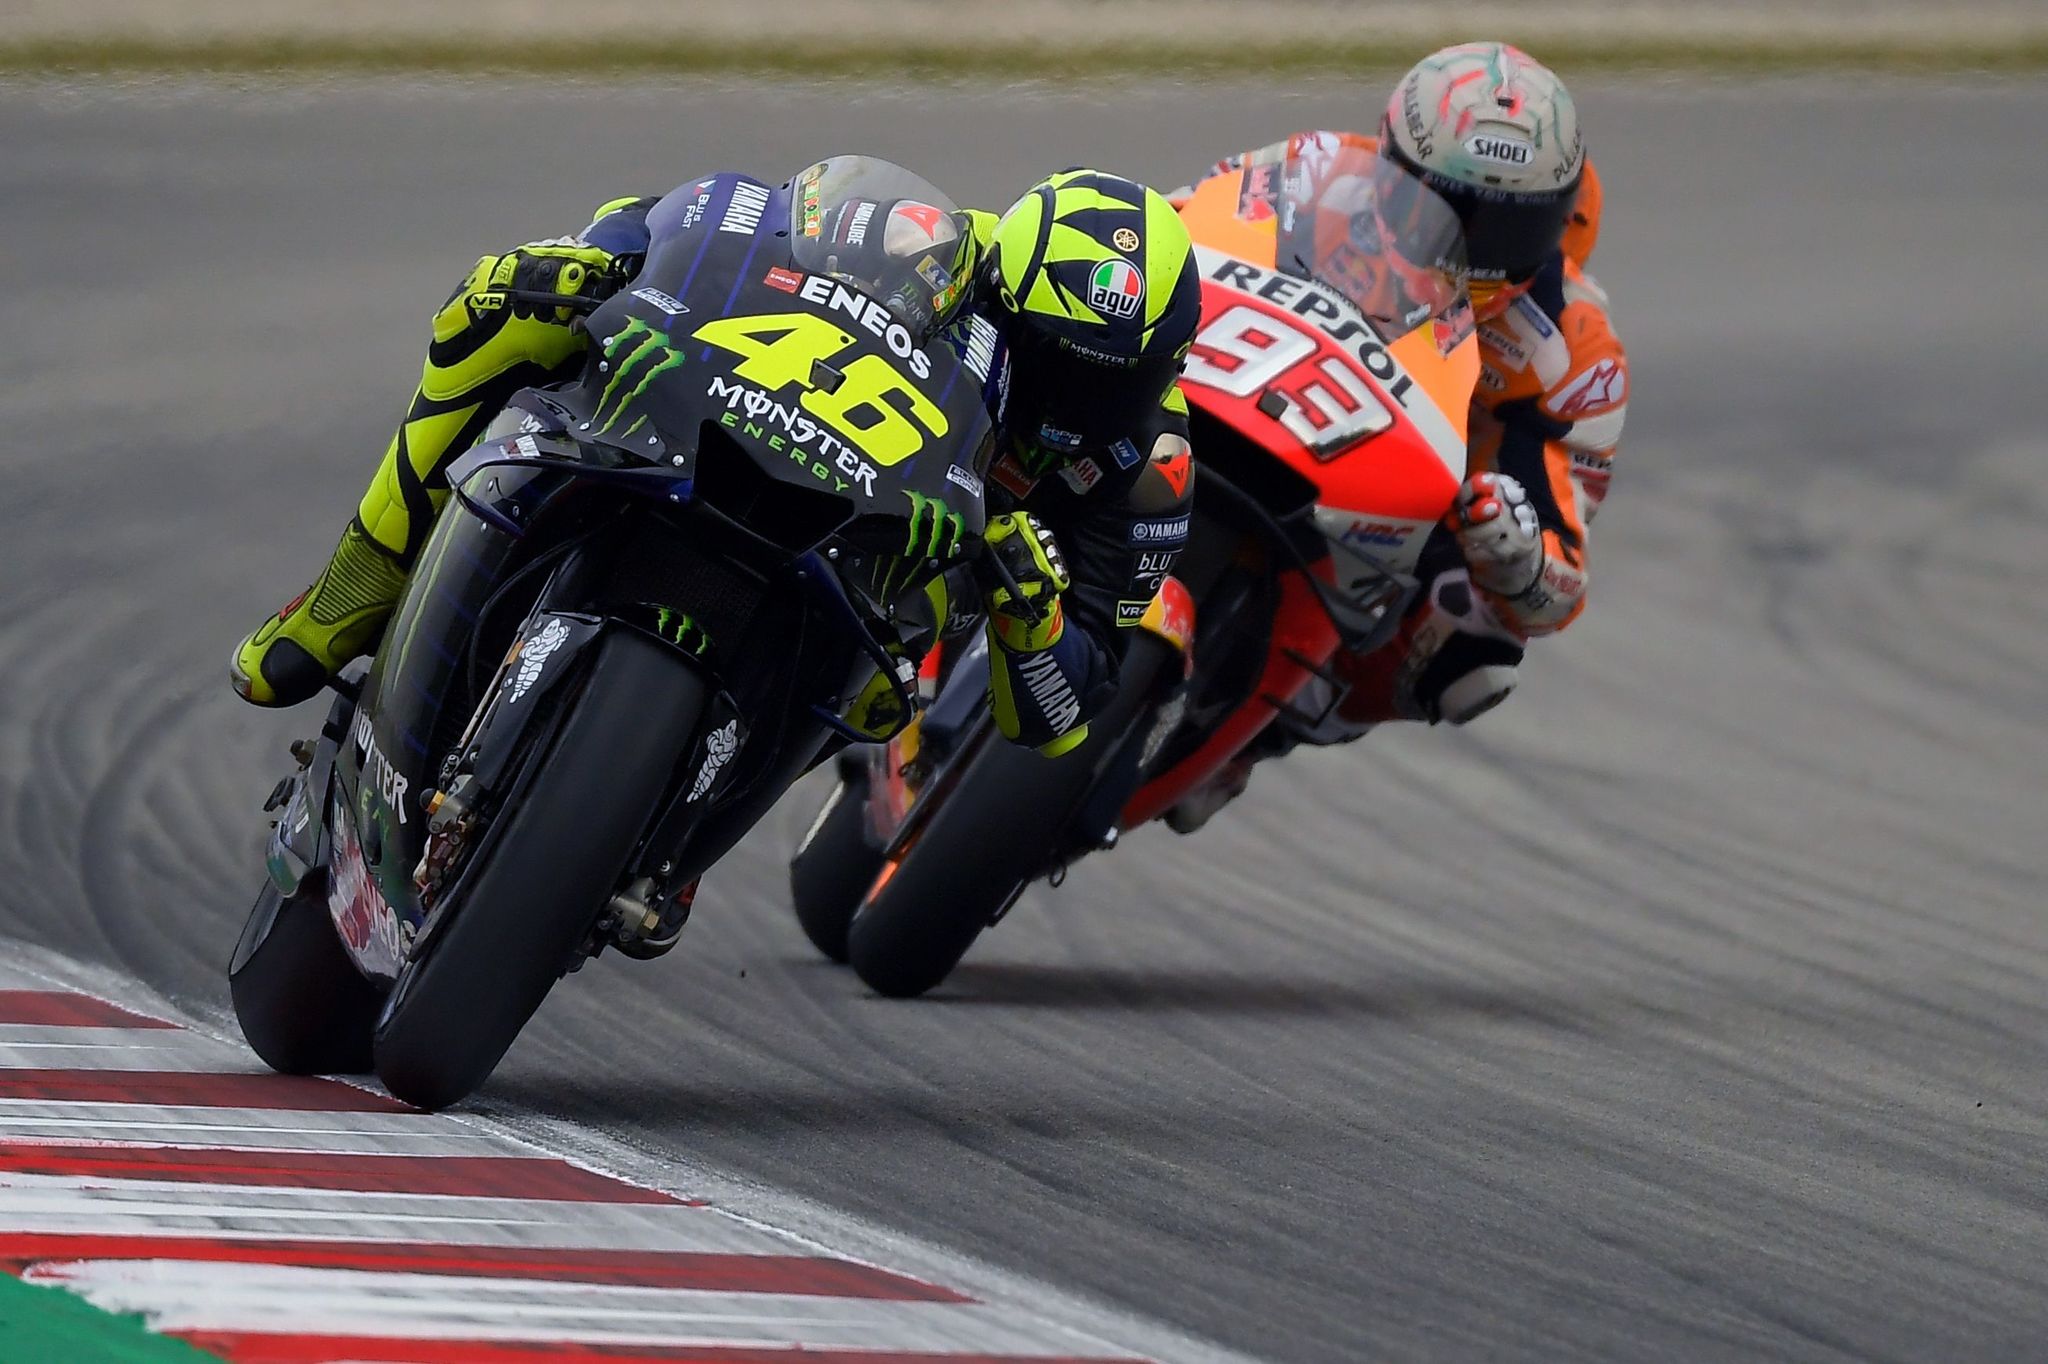 Monster Energy Yamahas Italian rider Valentino <HIT>Rossi</HIT> (L) and Repsol Honda Teams Spanish rider Marc <HIT>Marquez</HIT> ride during the Catalunya MotoGP Grand Prix first free practice session at the Catalunya racetrack in Montmelo, near Barcelona, on June 14, 2019. (Photo by LLUIS GENE / AFP)